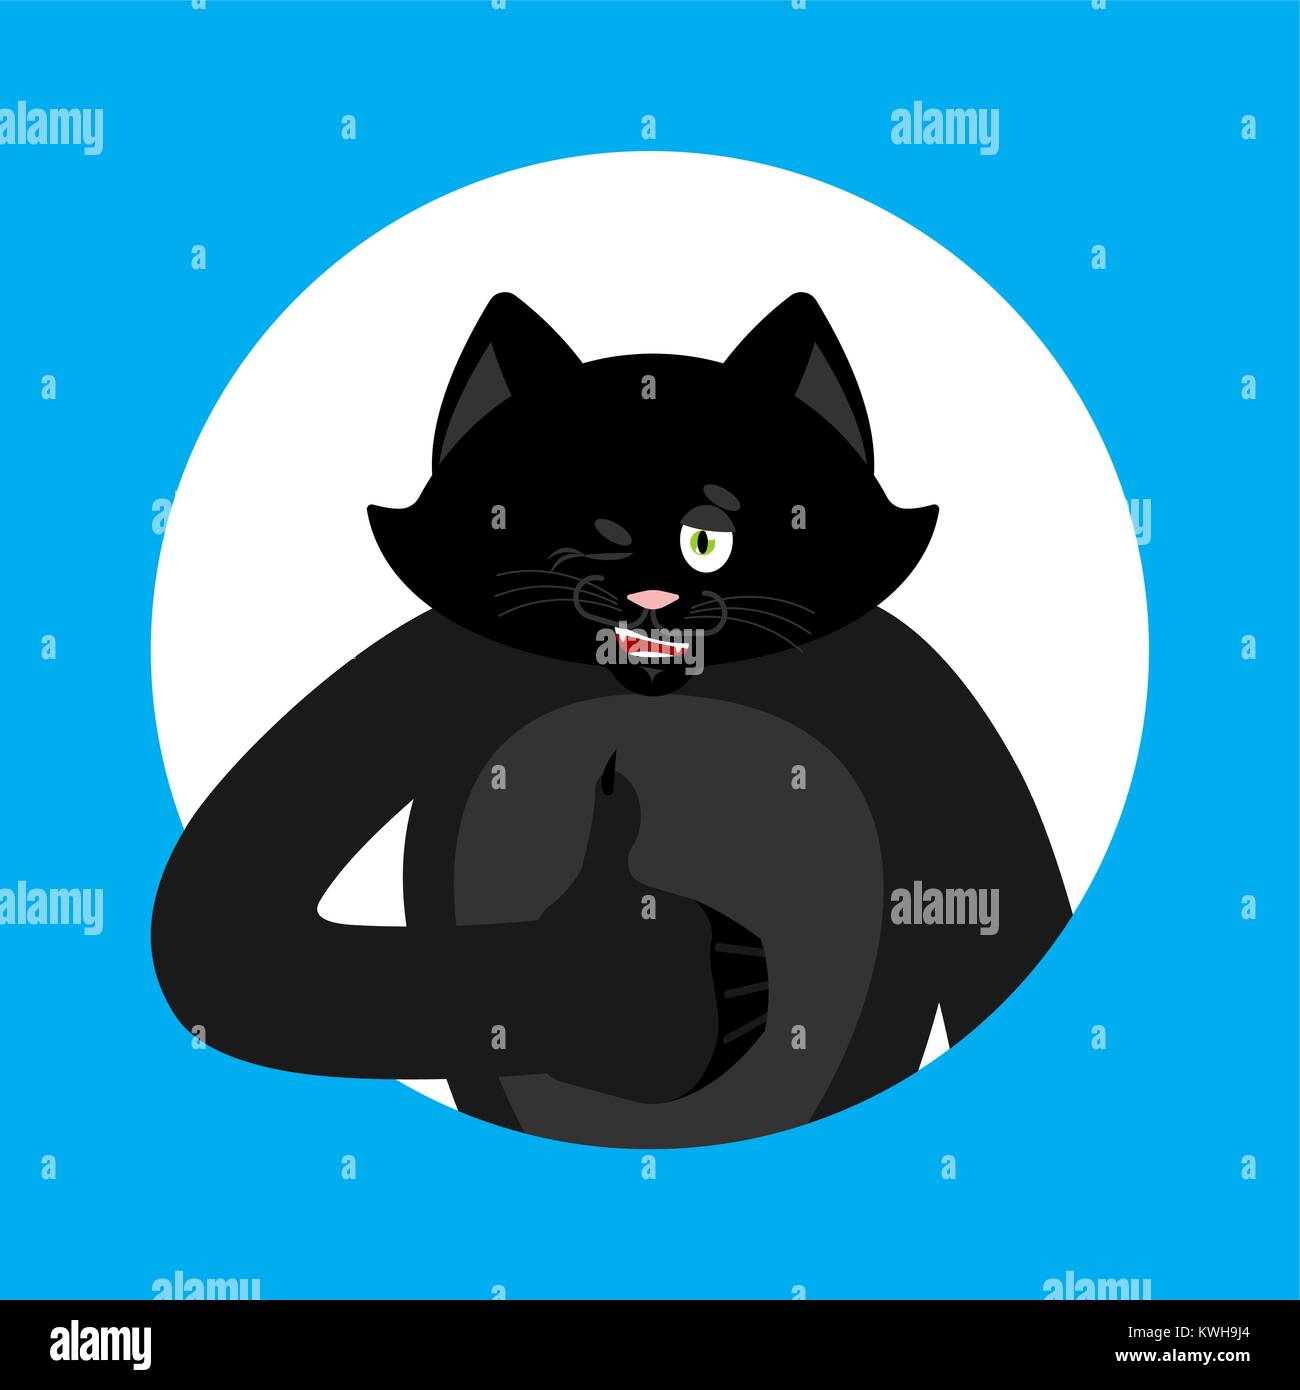 Cat thumbs up and winks. Pet happy emoji. Kitty Vector illustration Stock Vector